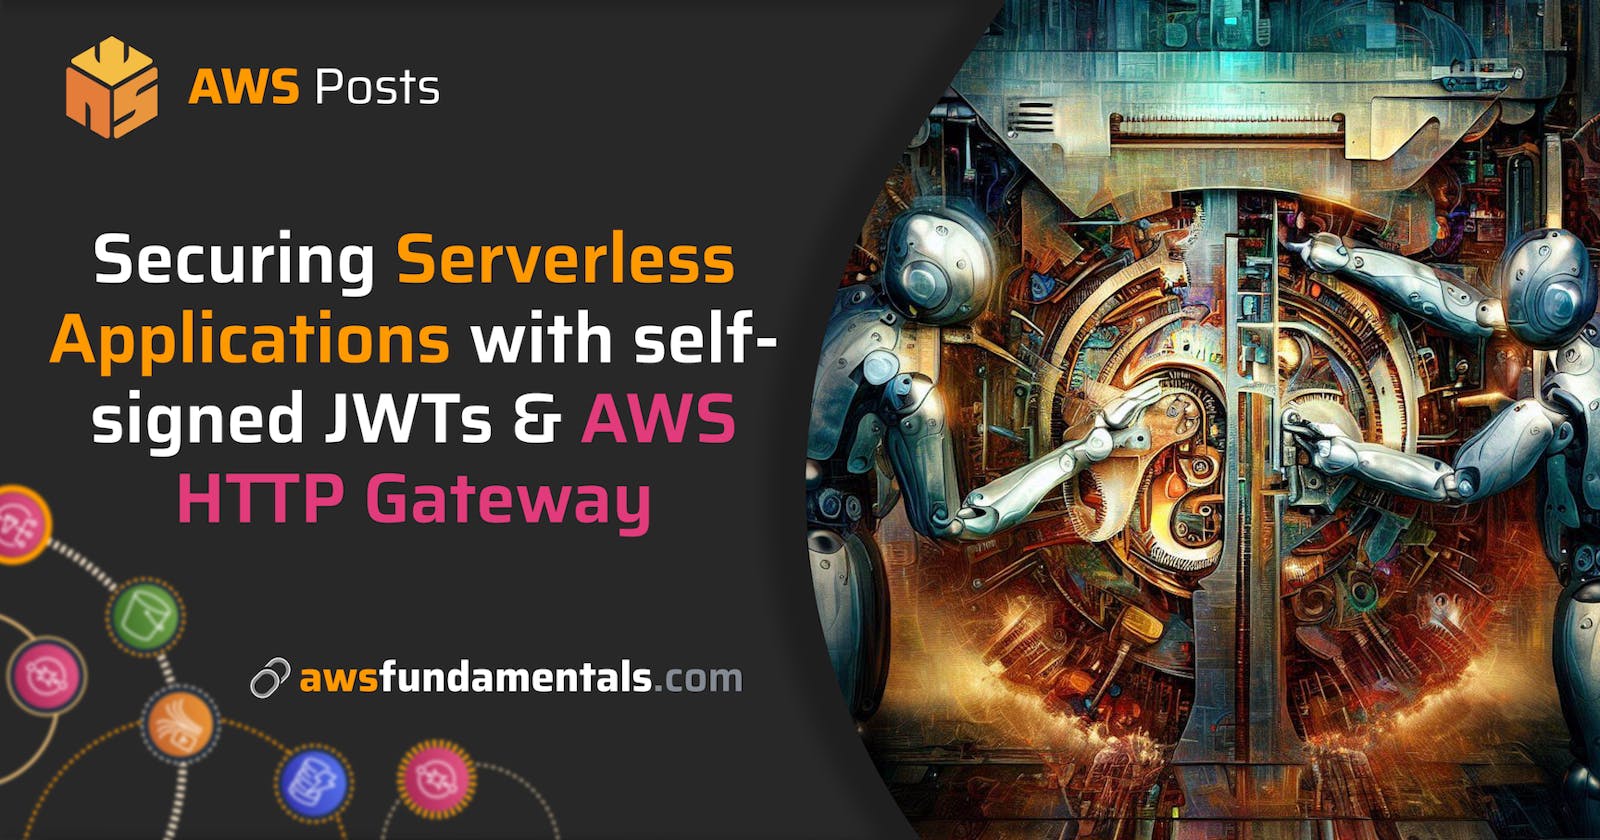 Securing your Serverless Application with self-signed JWTs & AWS HTTP Gateway